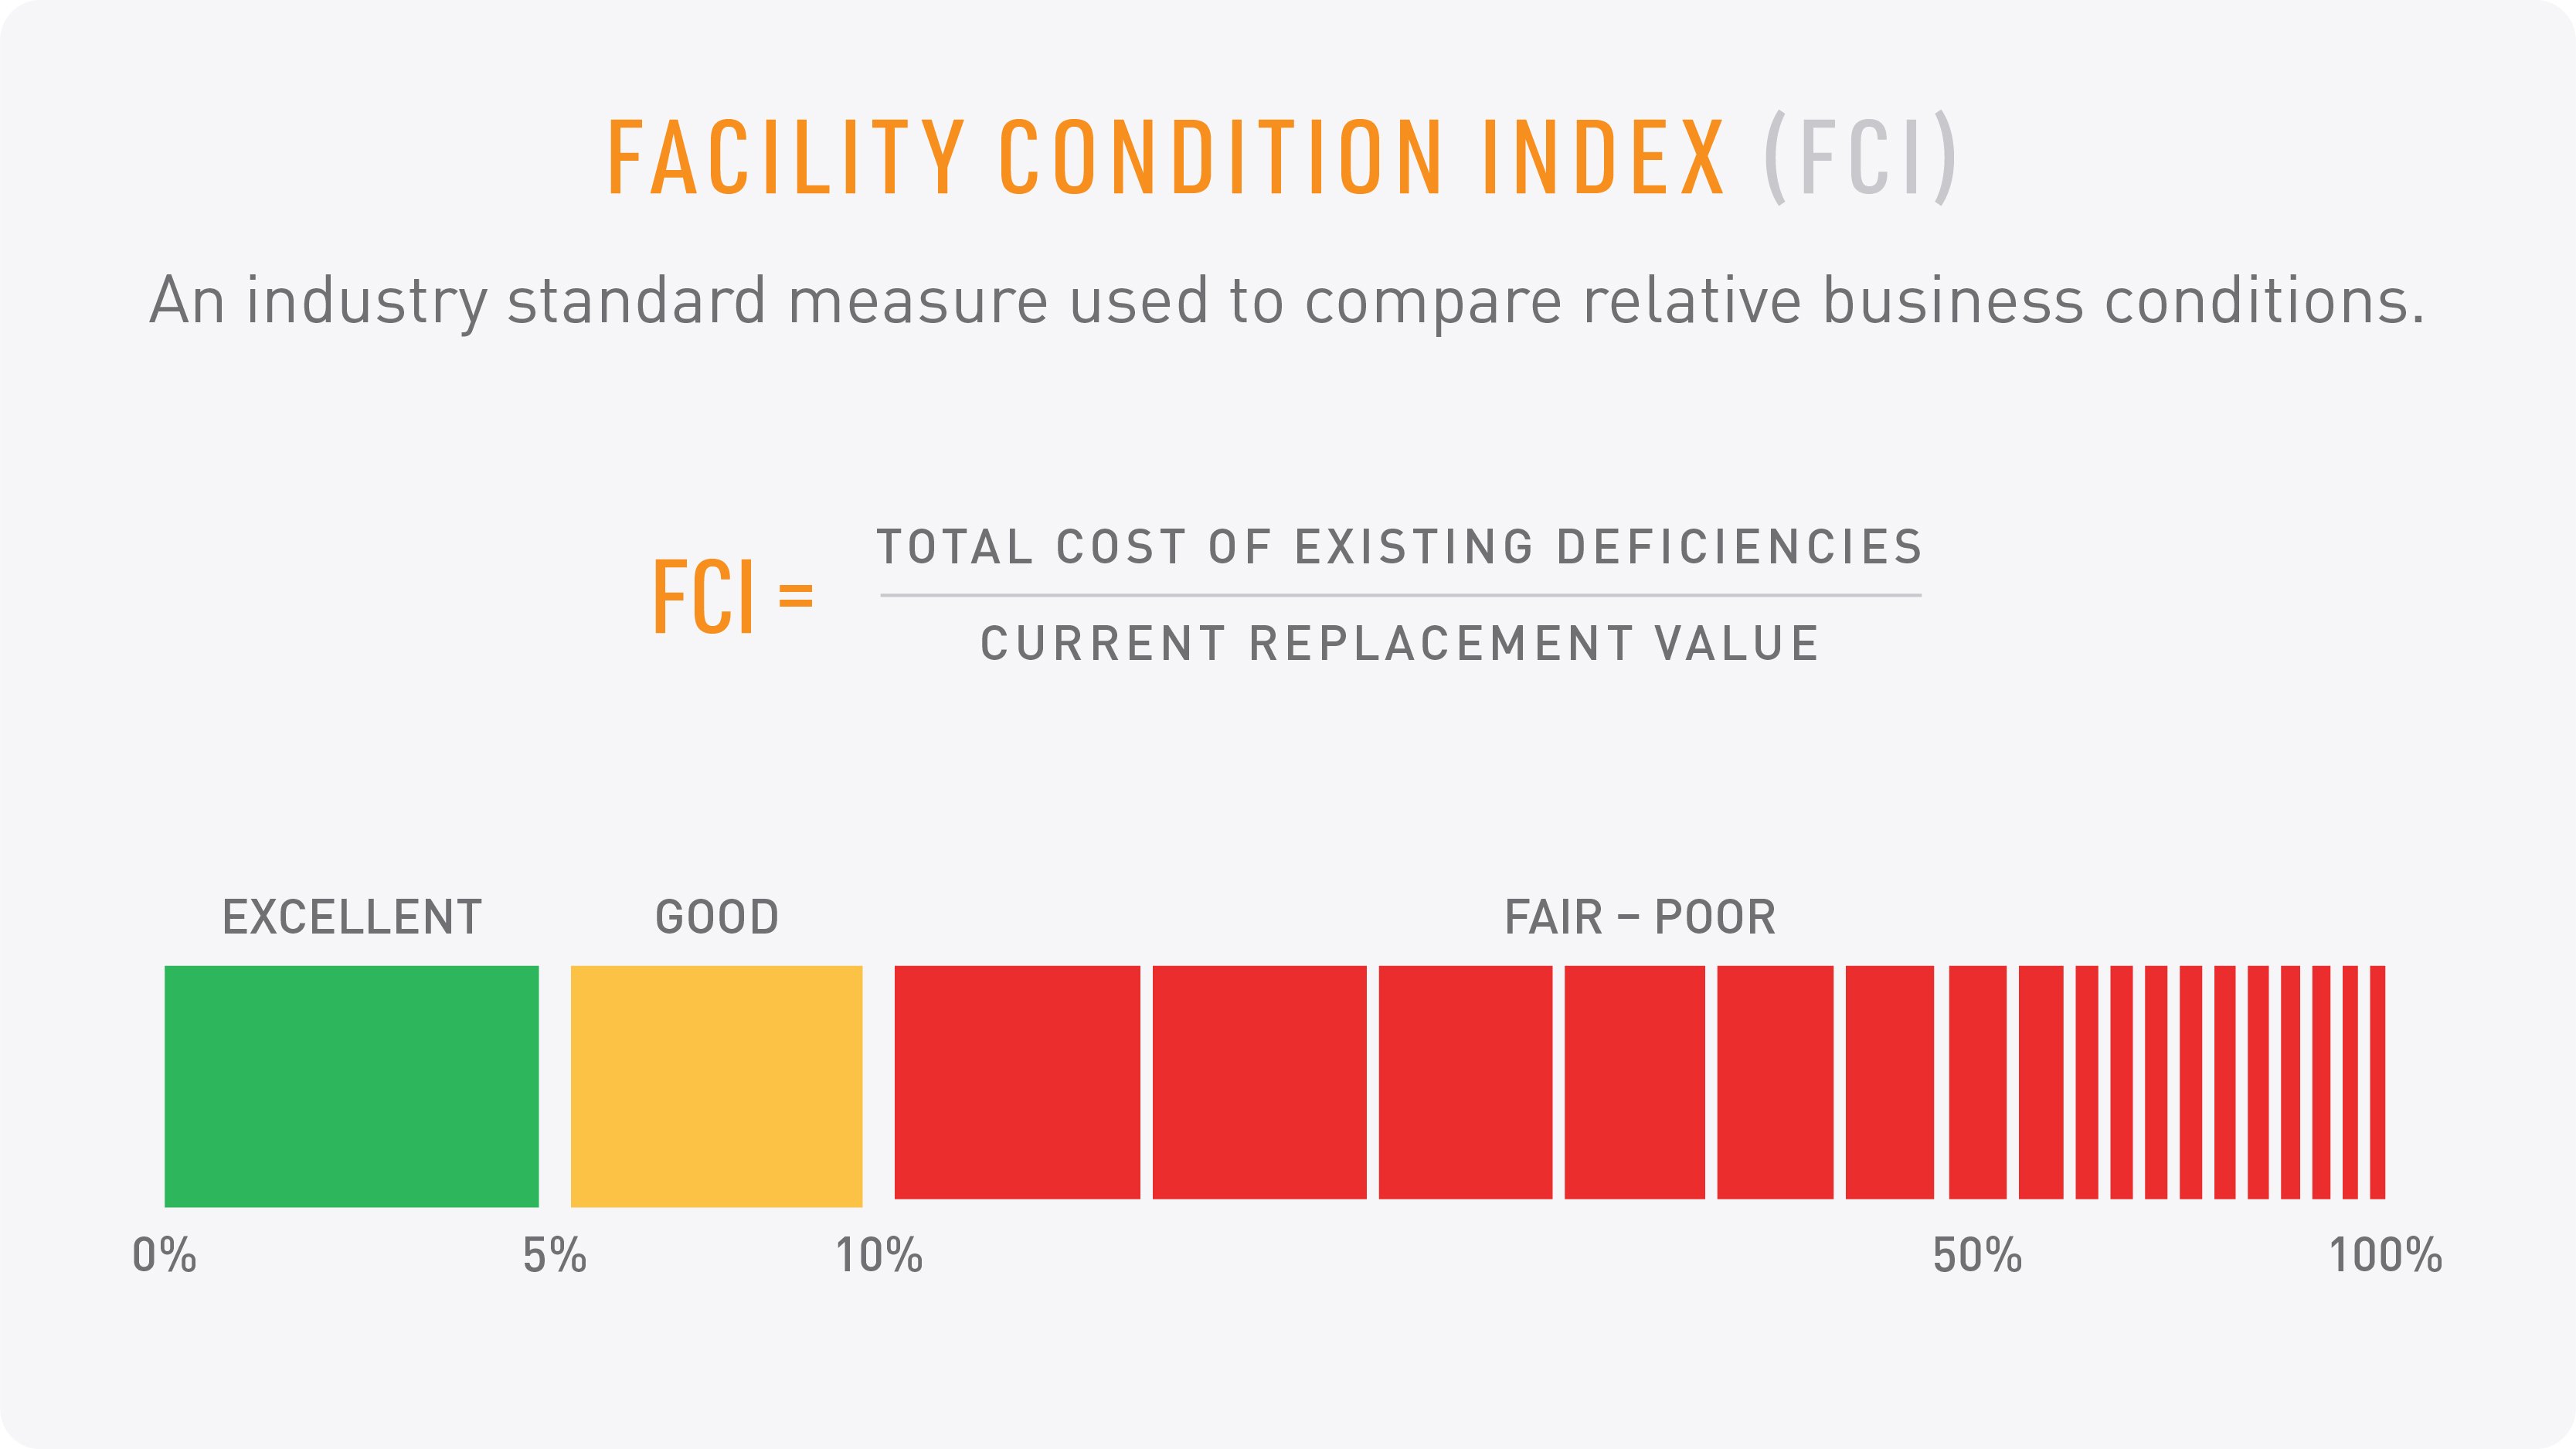 Facility Condition Index, an industry standard measure used to compare relative business conditions.